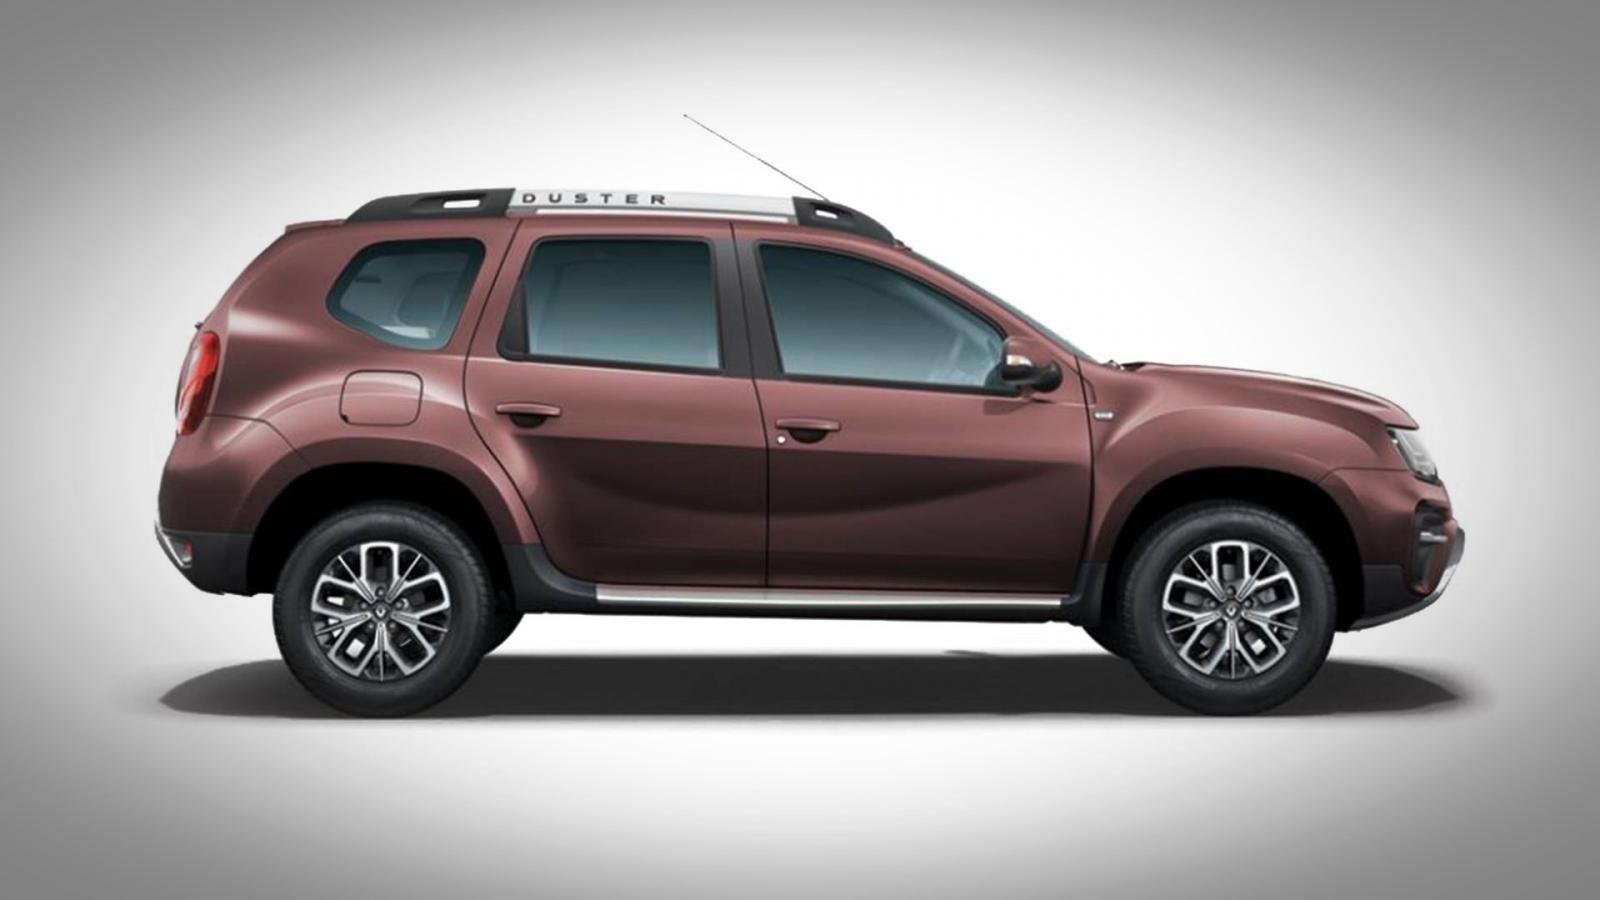 Renault Duster maghogany brown